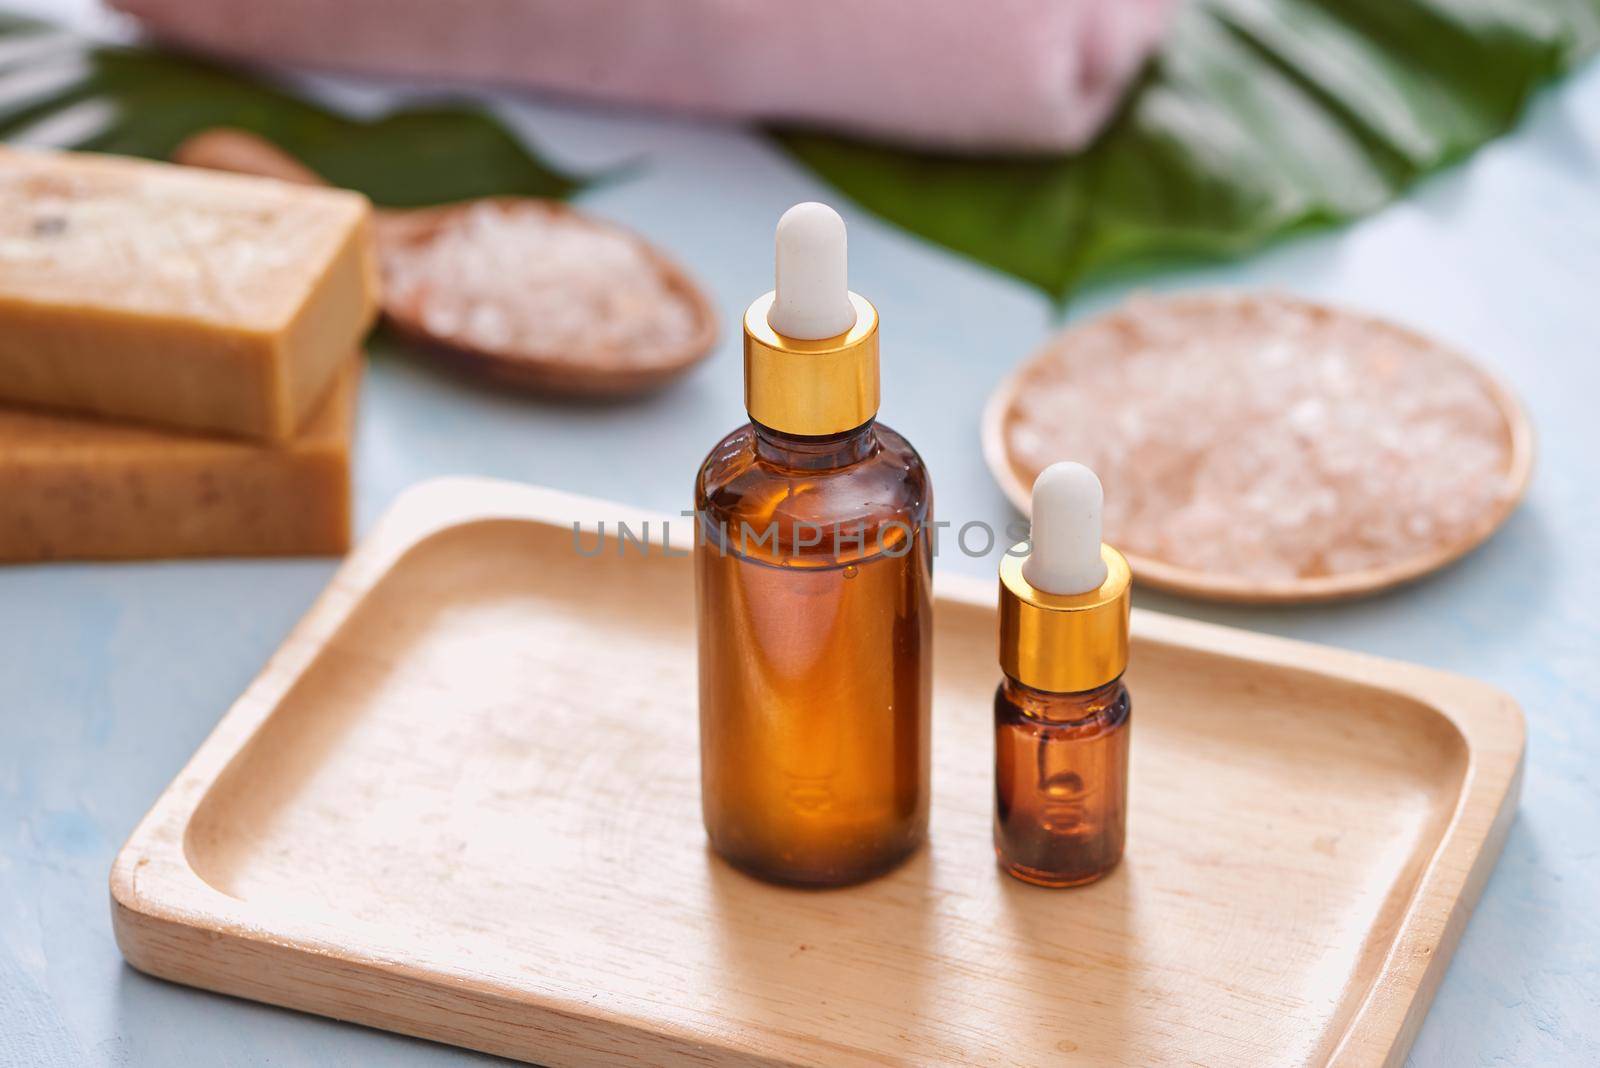 vials and droppers .the natural beauty skincare product for branding with the organic ingredient extract , leaf ,oil and laboratory glass ware